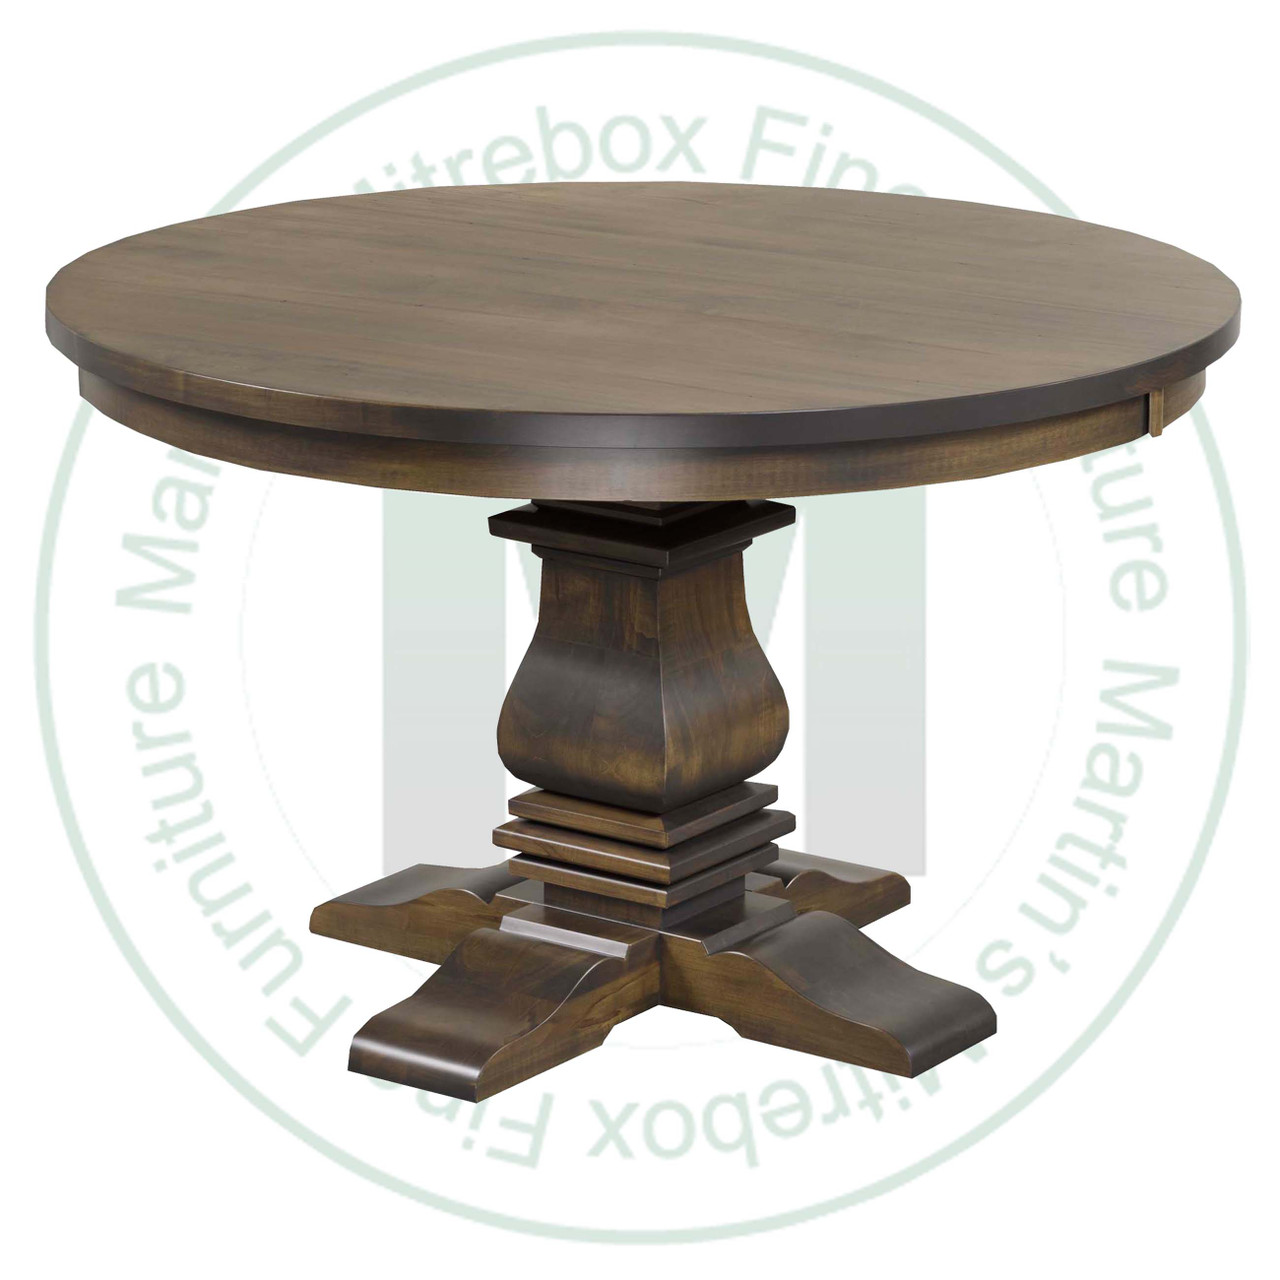 Oak Spartan Collection Single Pedestal Table 48''D x 48''W x 30''H With 1 - 12'' Leaf. Table Has 1.25'' Thick Top